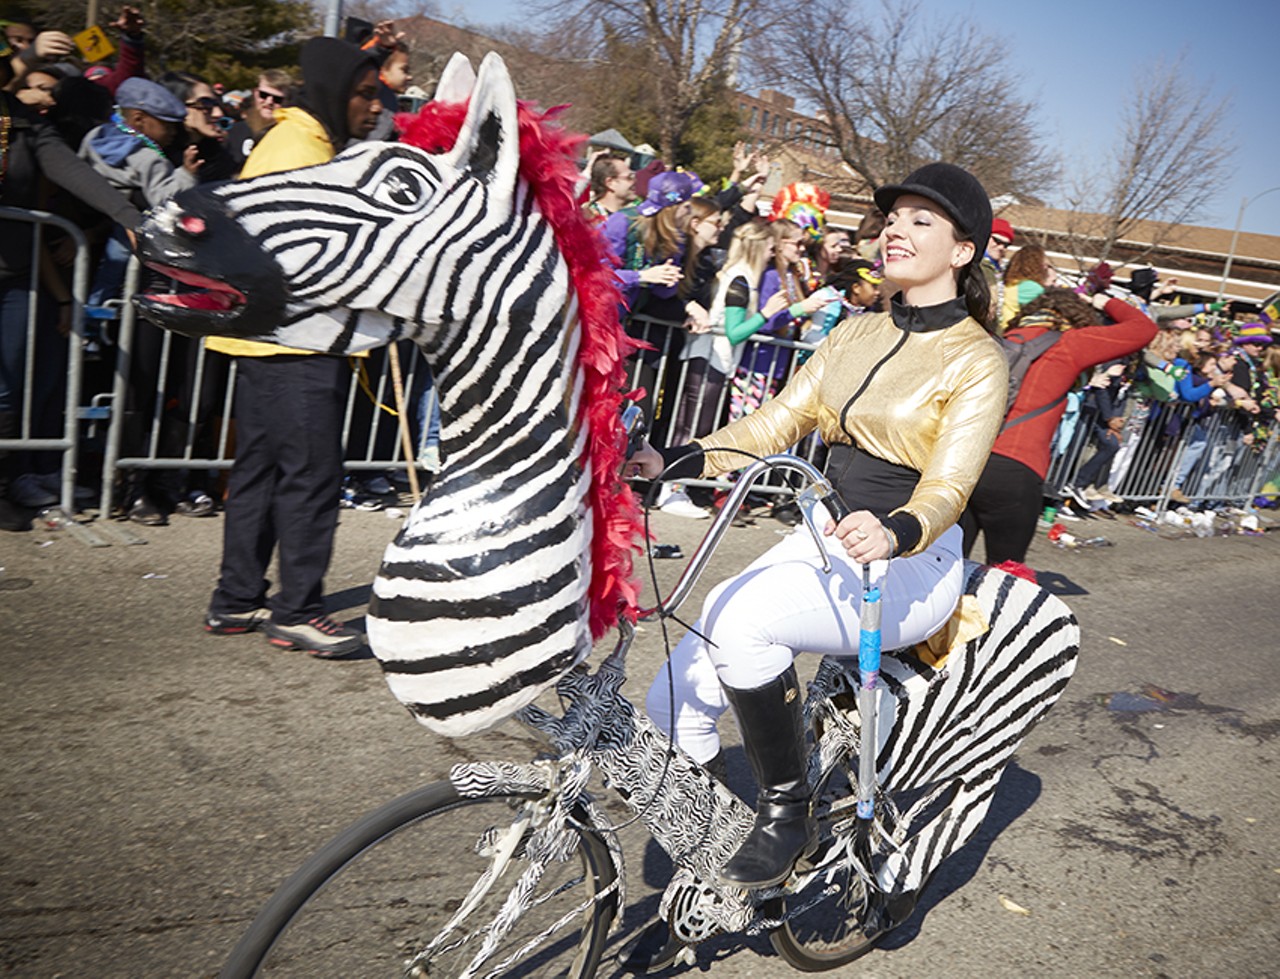 This lady regally pedaling a zebra.